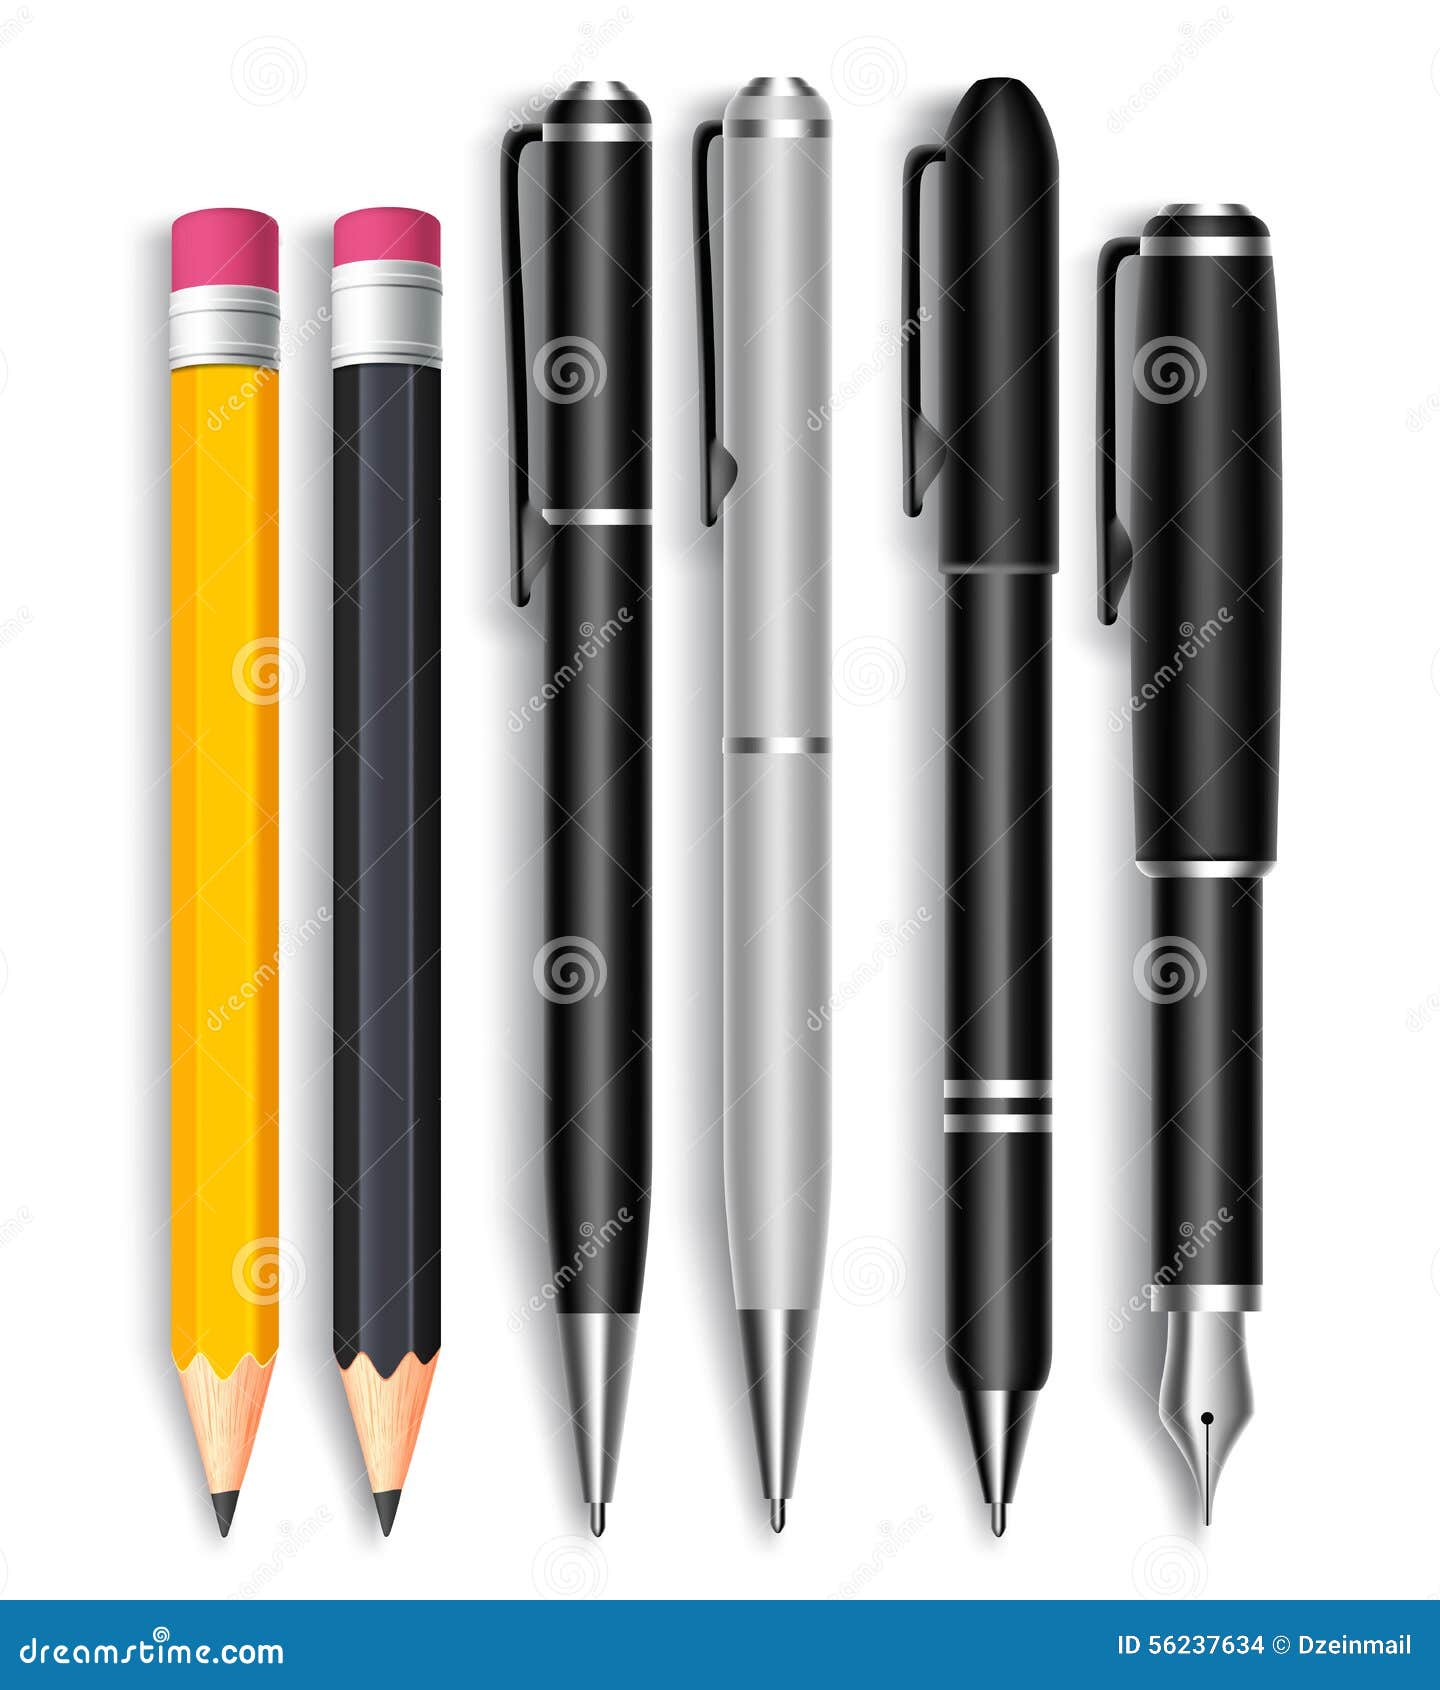 set of realistic 3d pencils and elegant black and silver ball pens